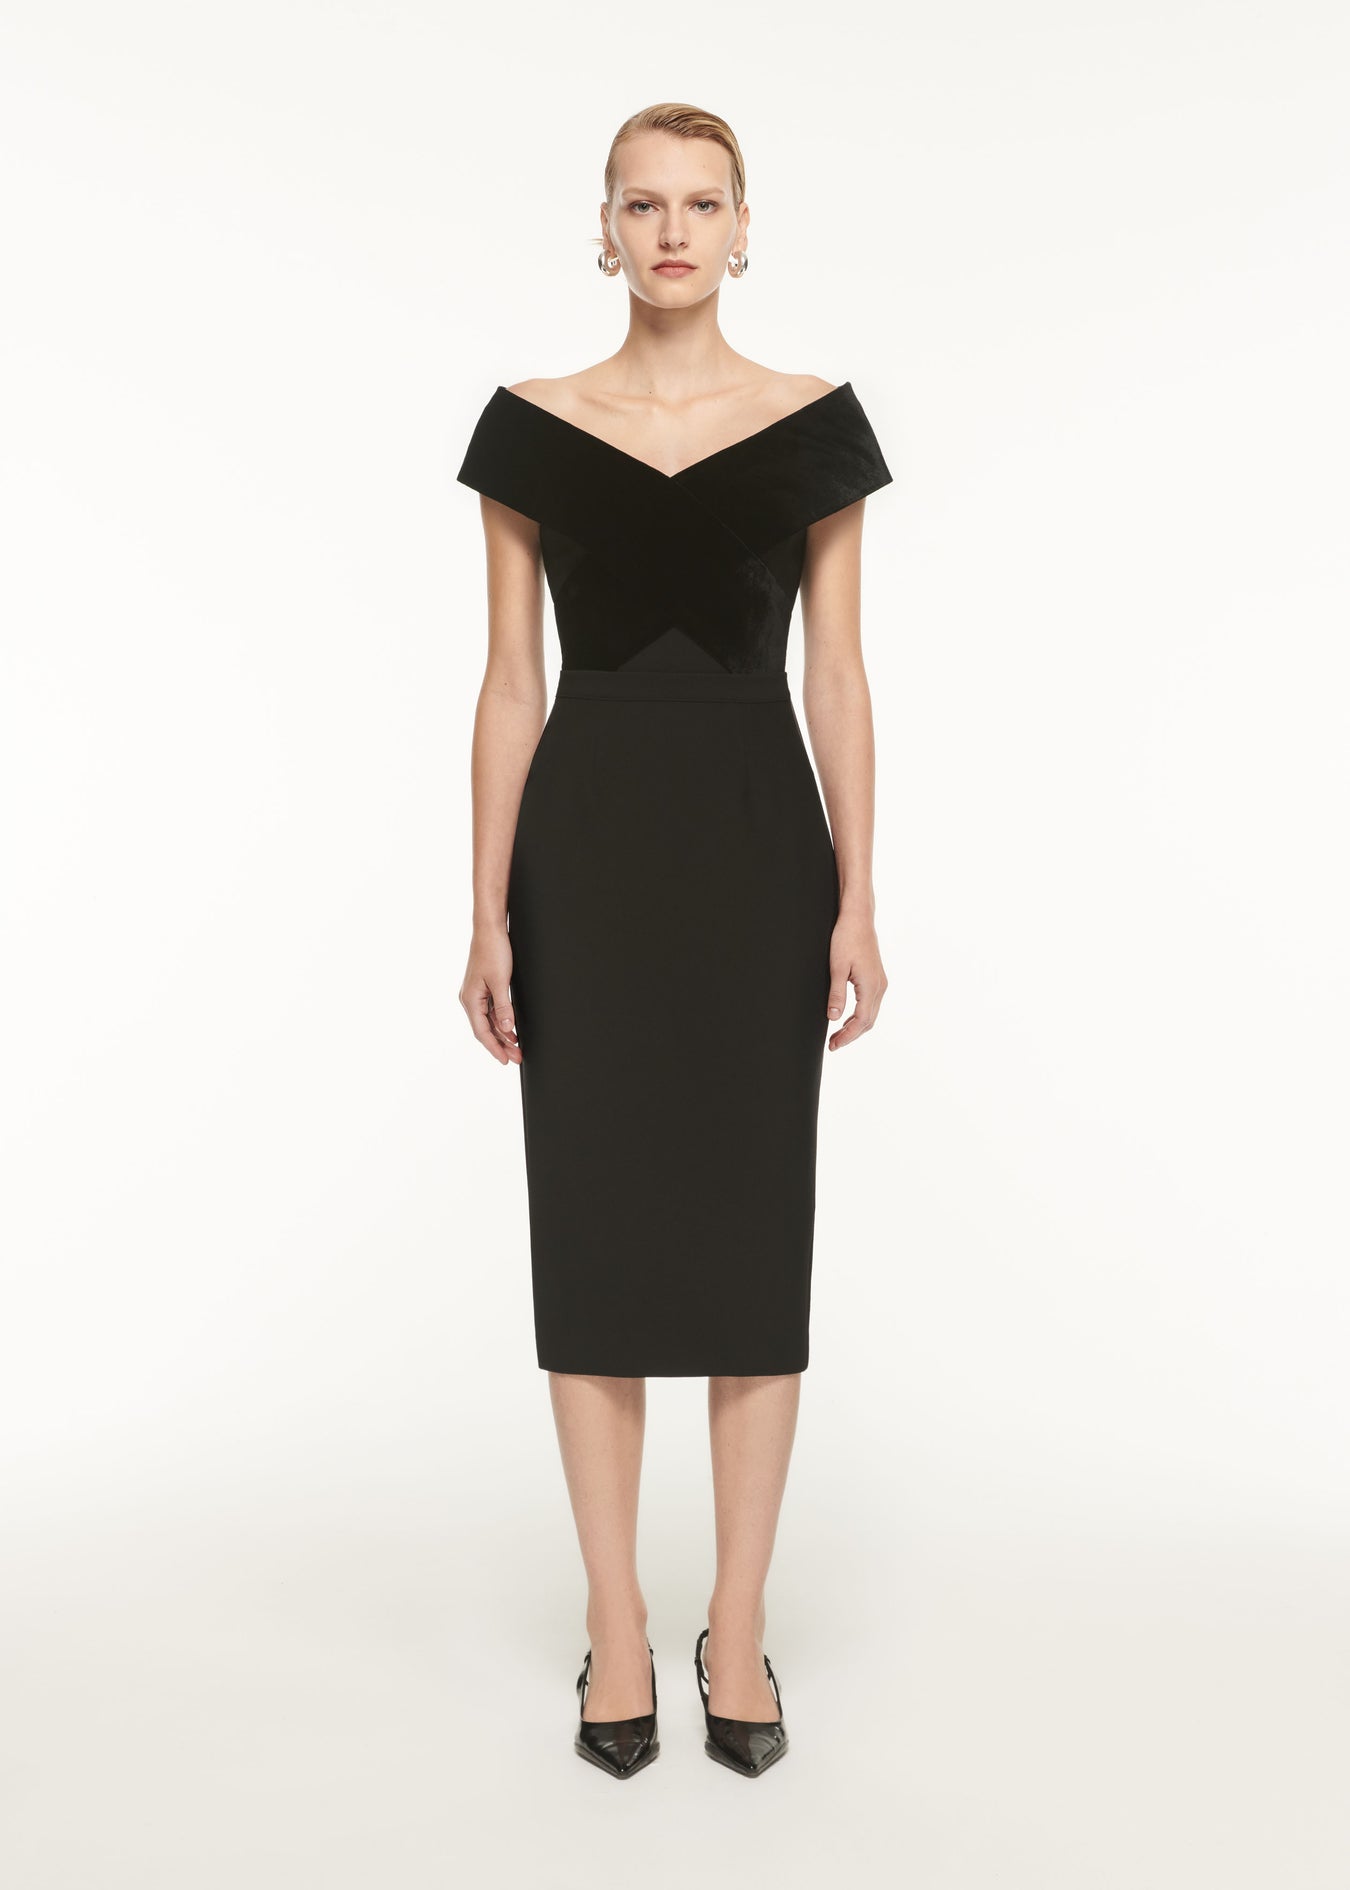 A woman wearing the Crepe Midi Skirt in Black